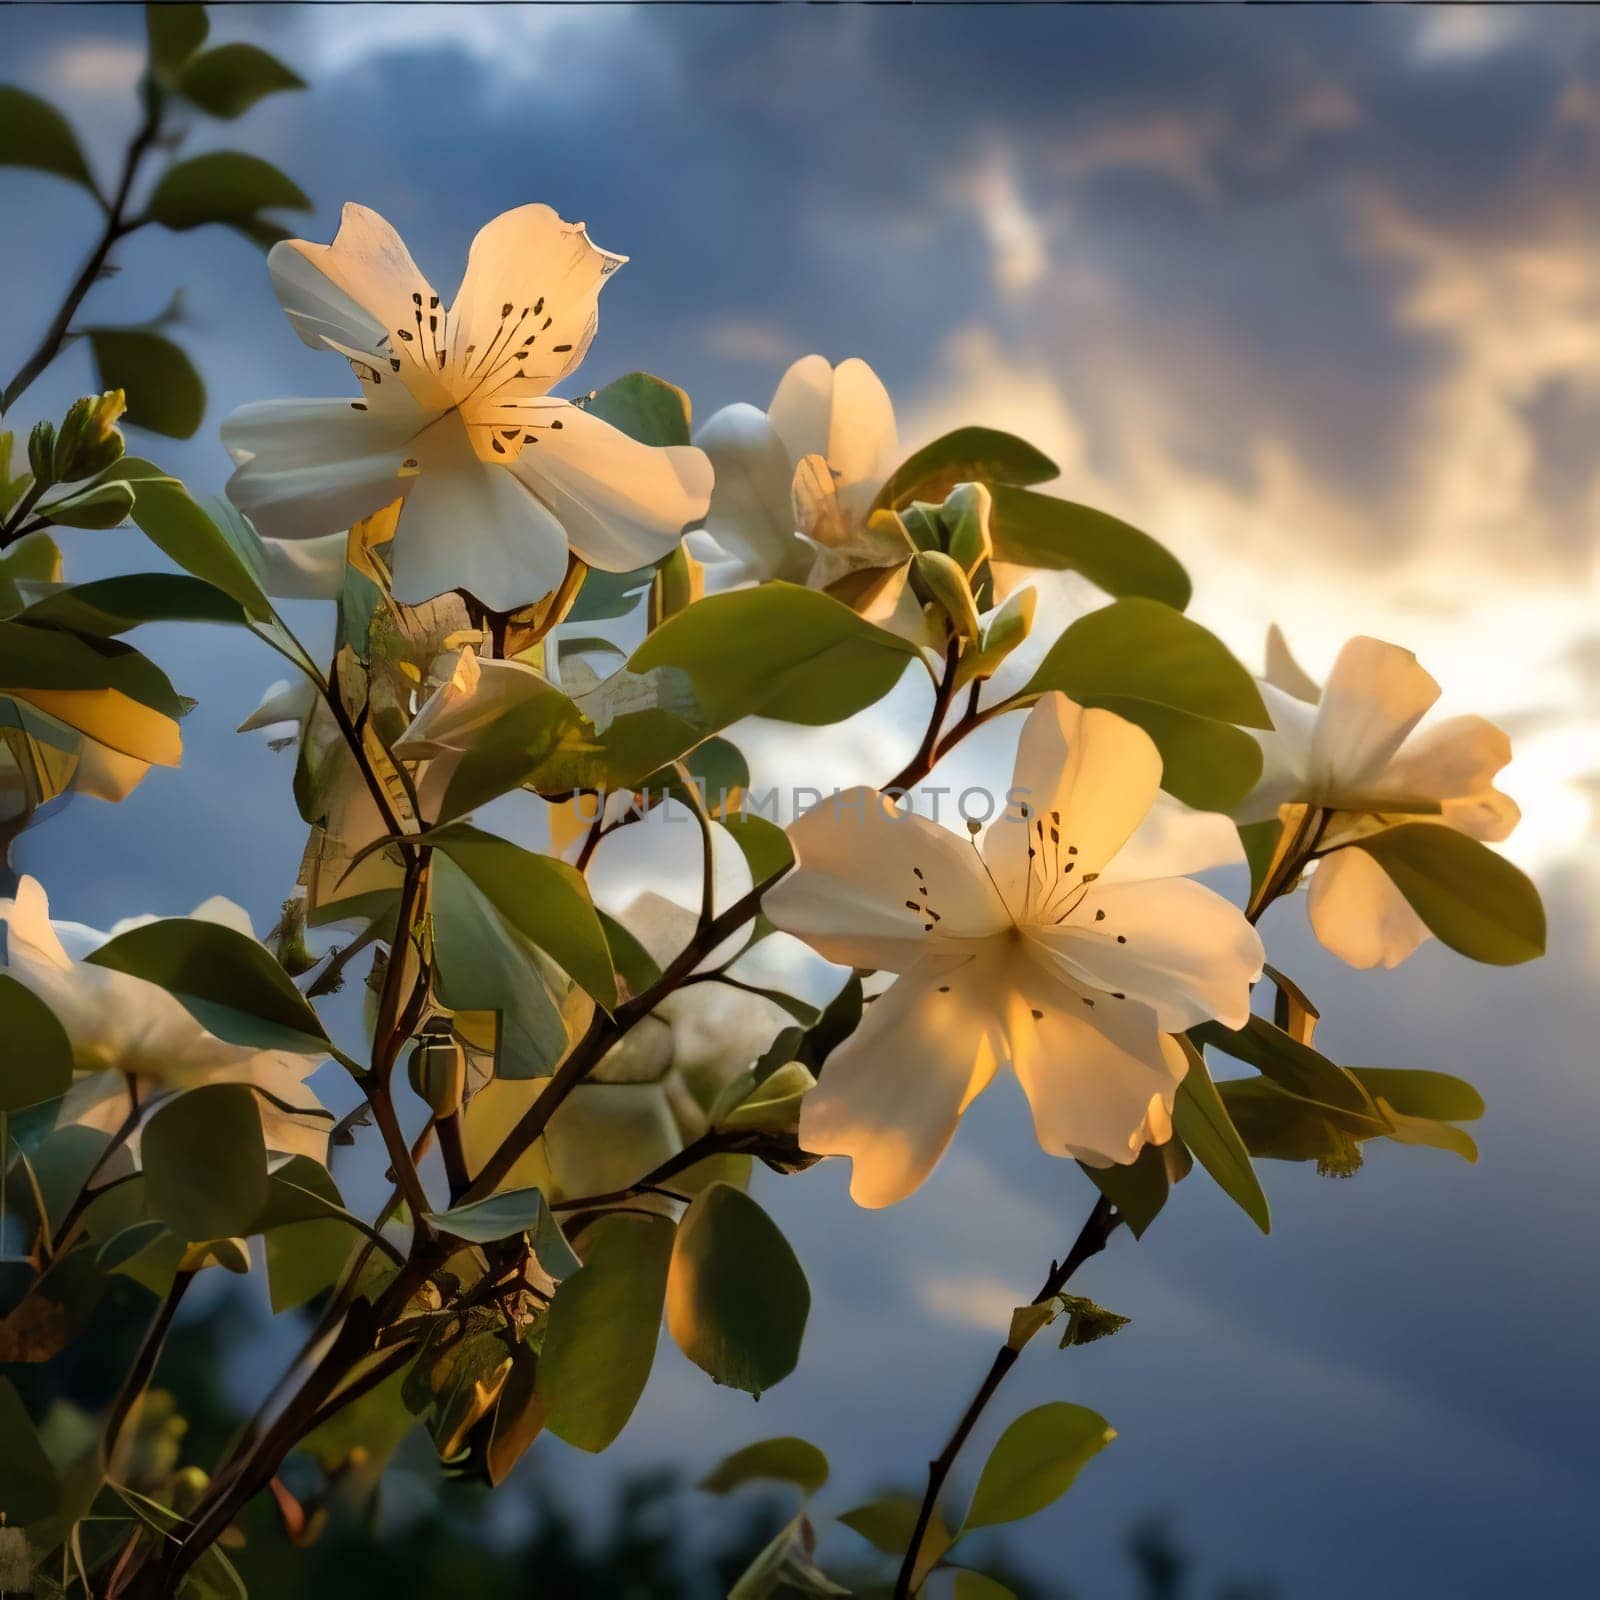 White flowers blooming on the branches of a tree around green leaves in the background the setting sun. Flowering flowers, a symbol of spring, new life. A joyful time of nature waking up to life.